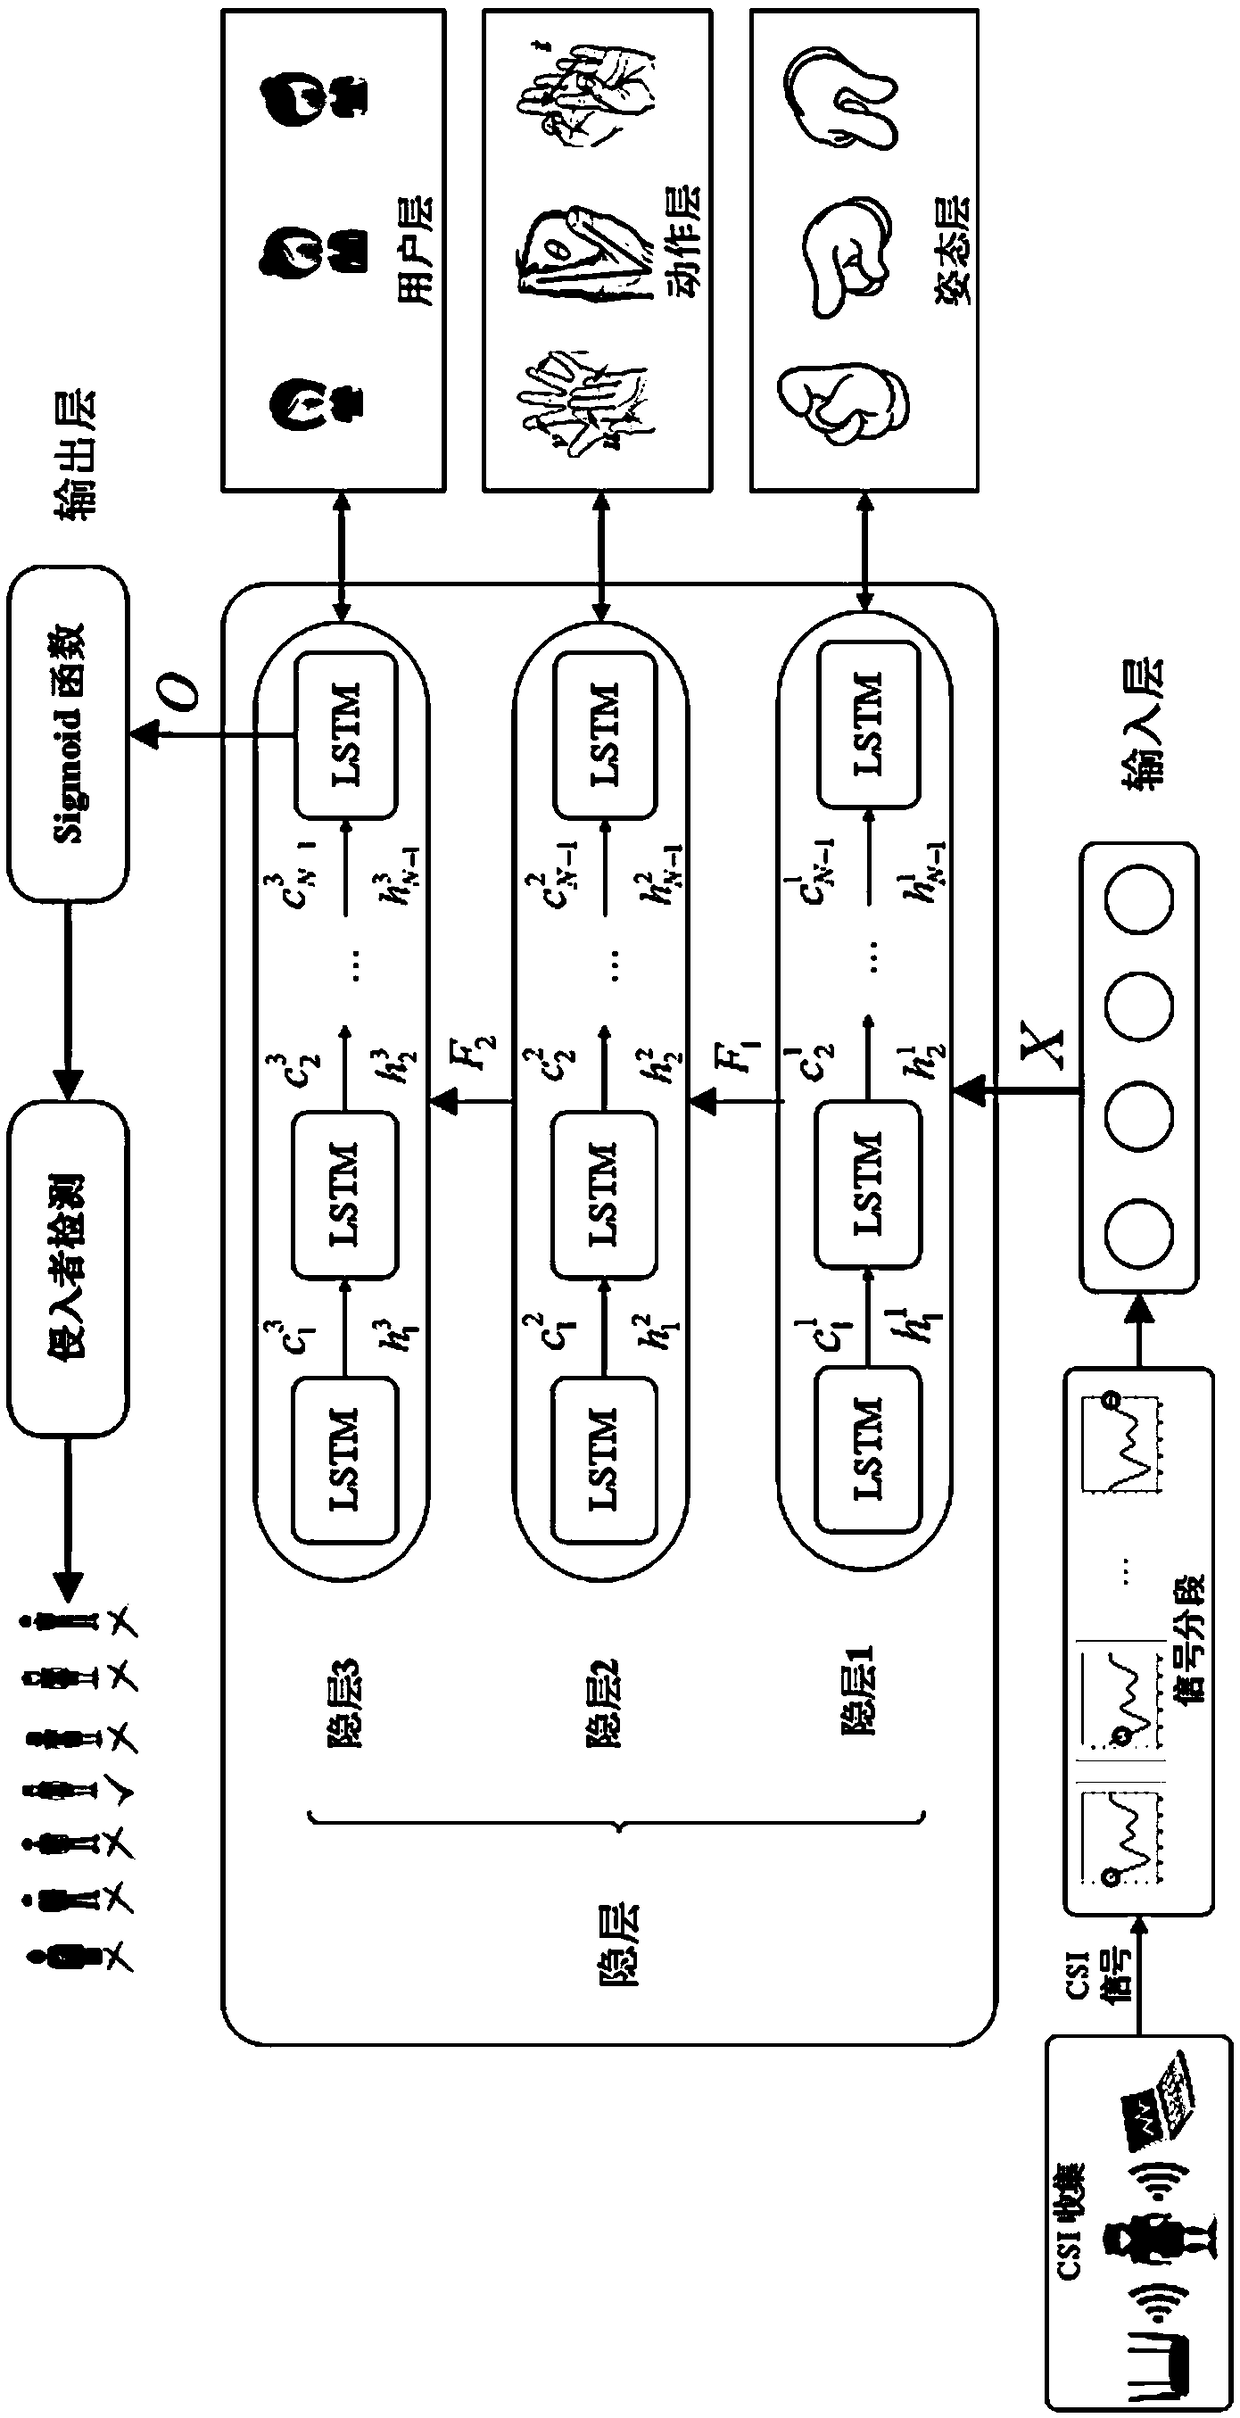 Smart home continuous user authentication method and system based on fine-grained finger gestures